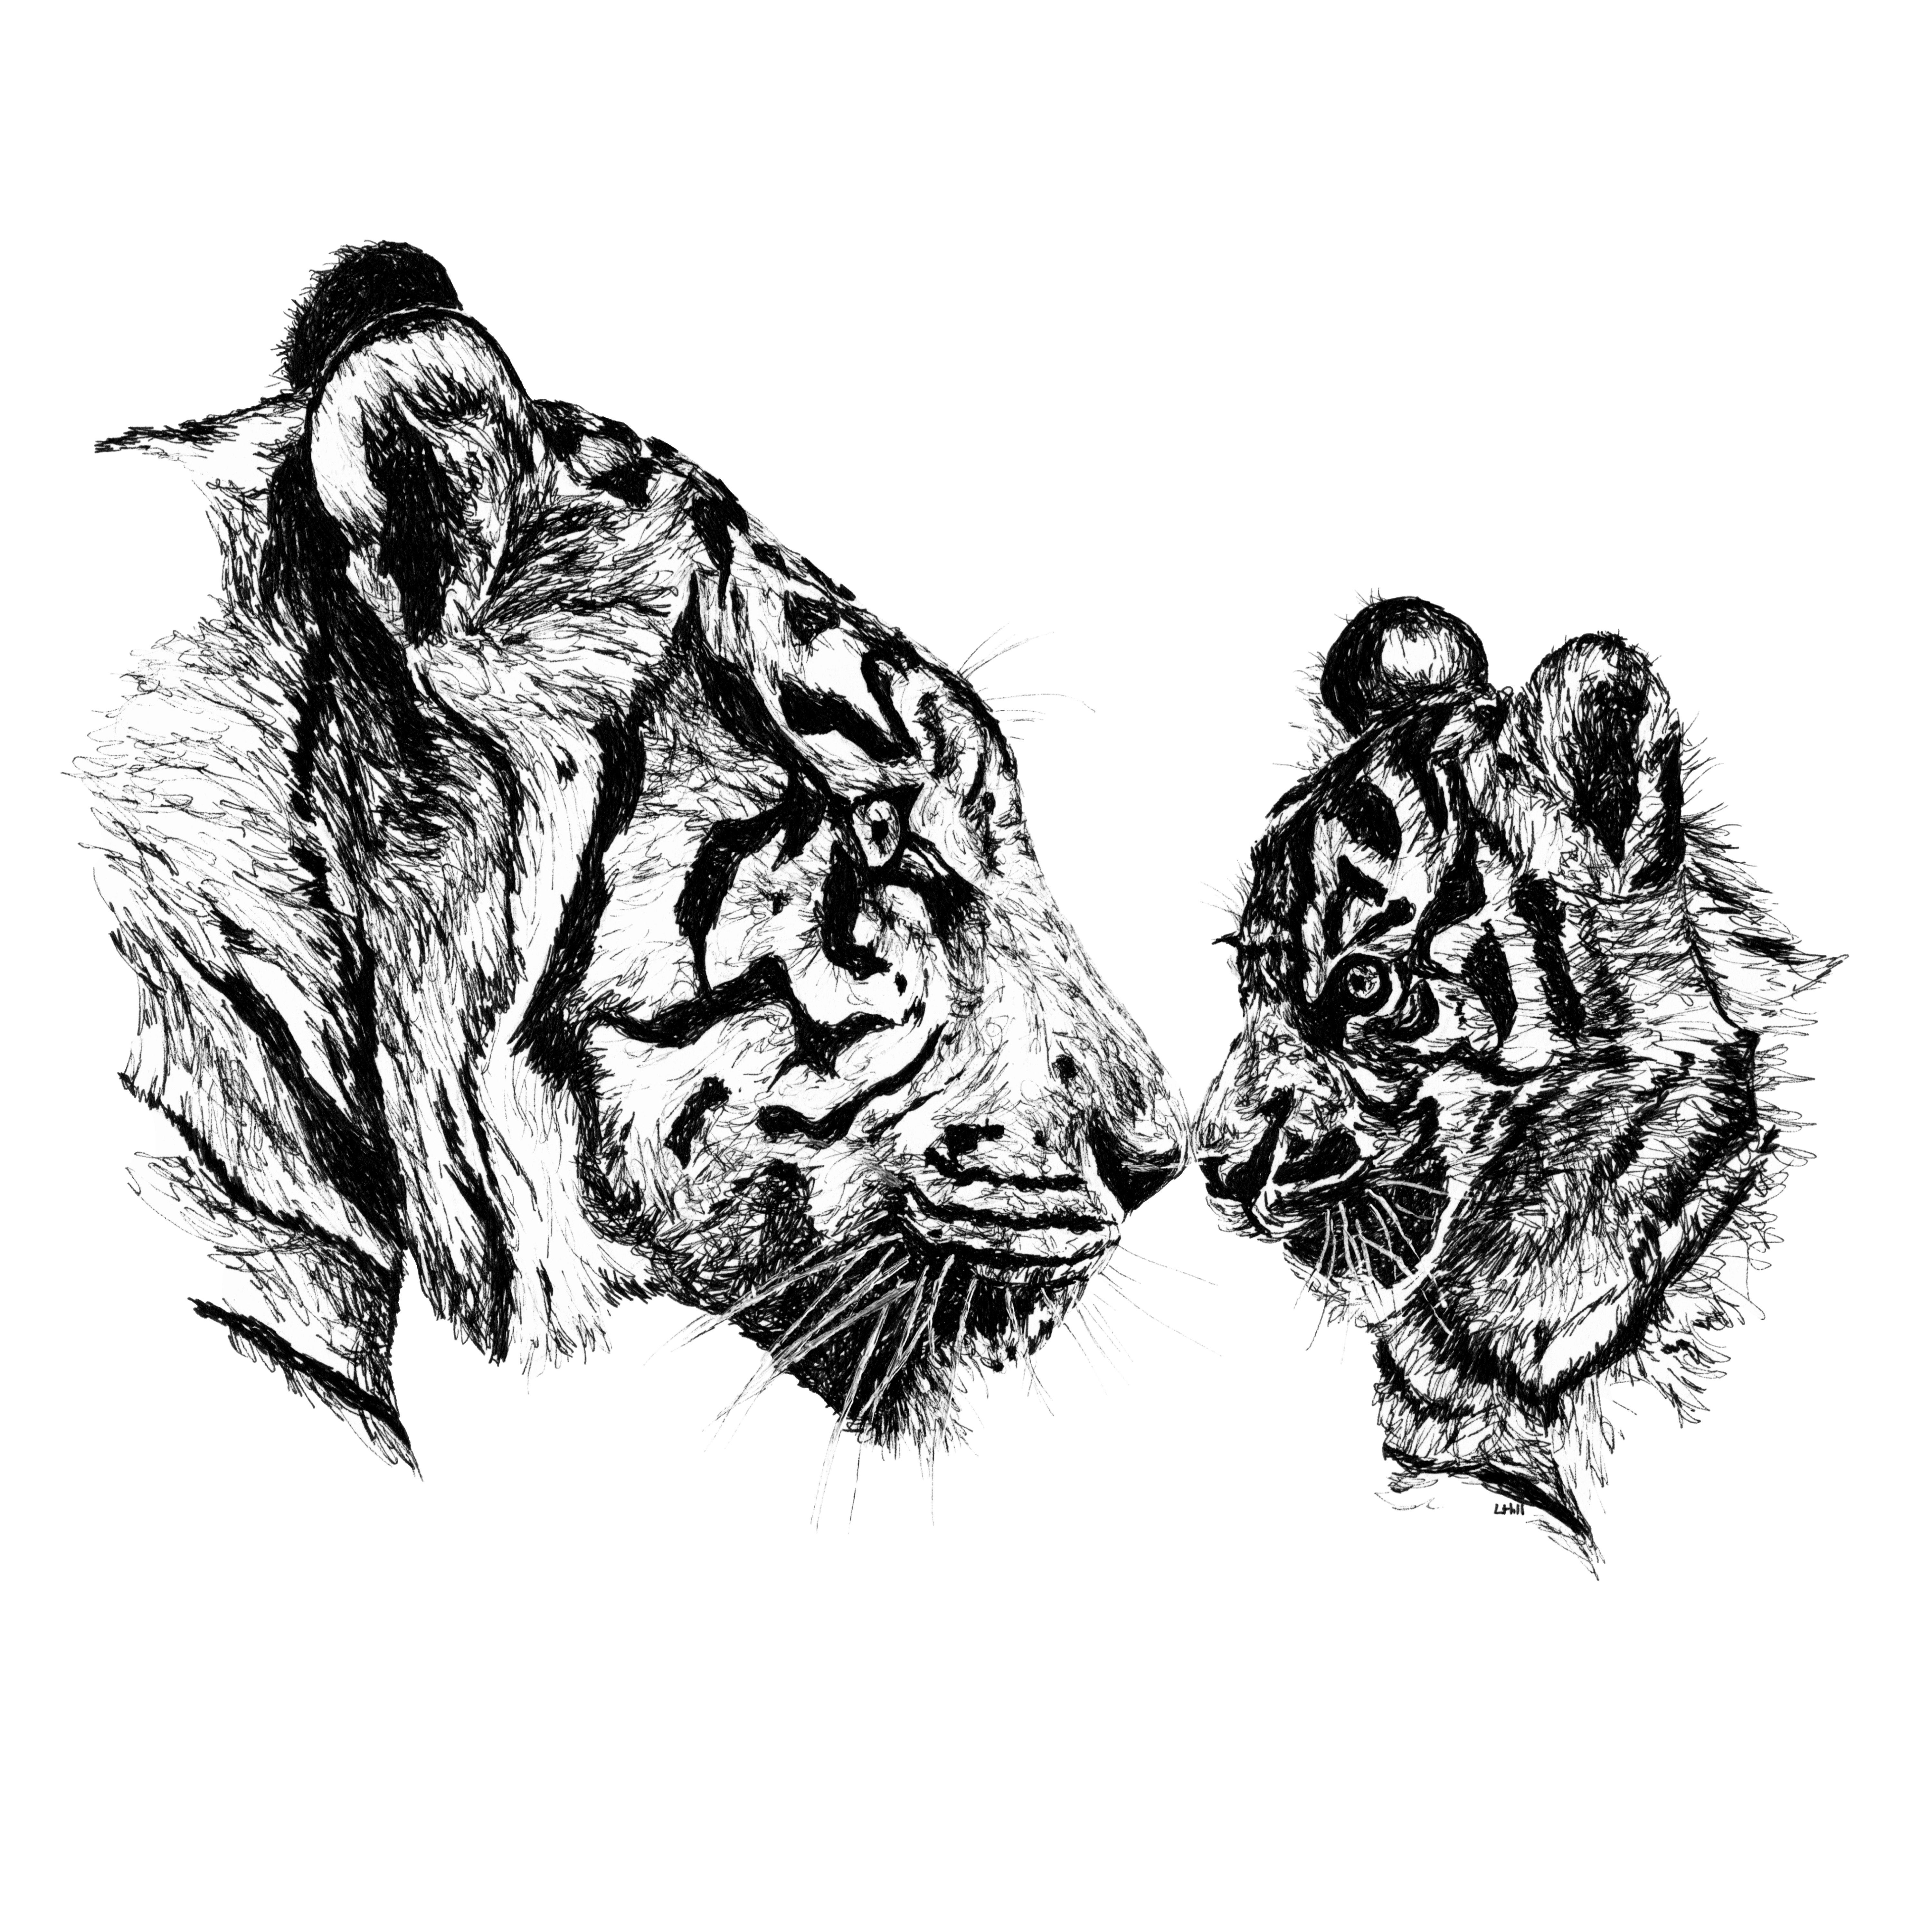 Tiger and cub pen and ink illustration by Louisa Hill